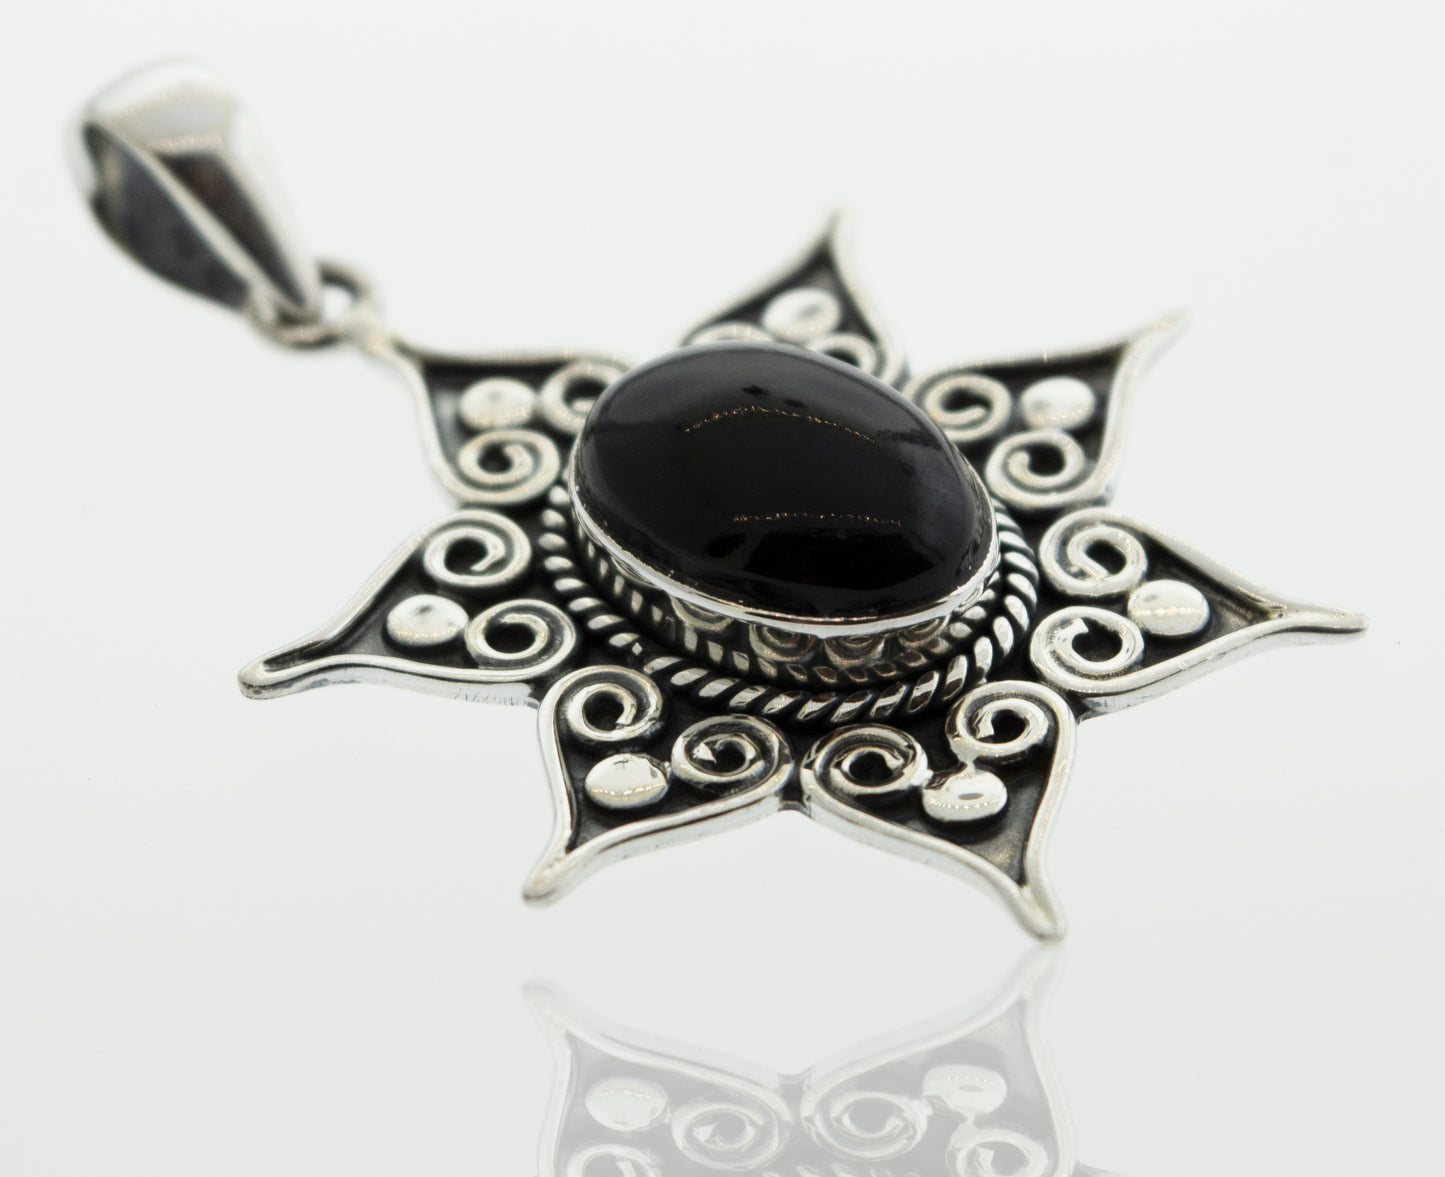 A Moonstone Pendant with a black onyx stone featuring spirals by Super Silver.